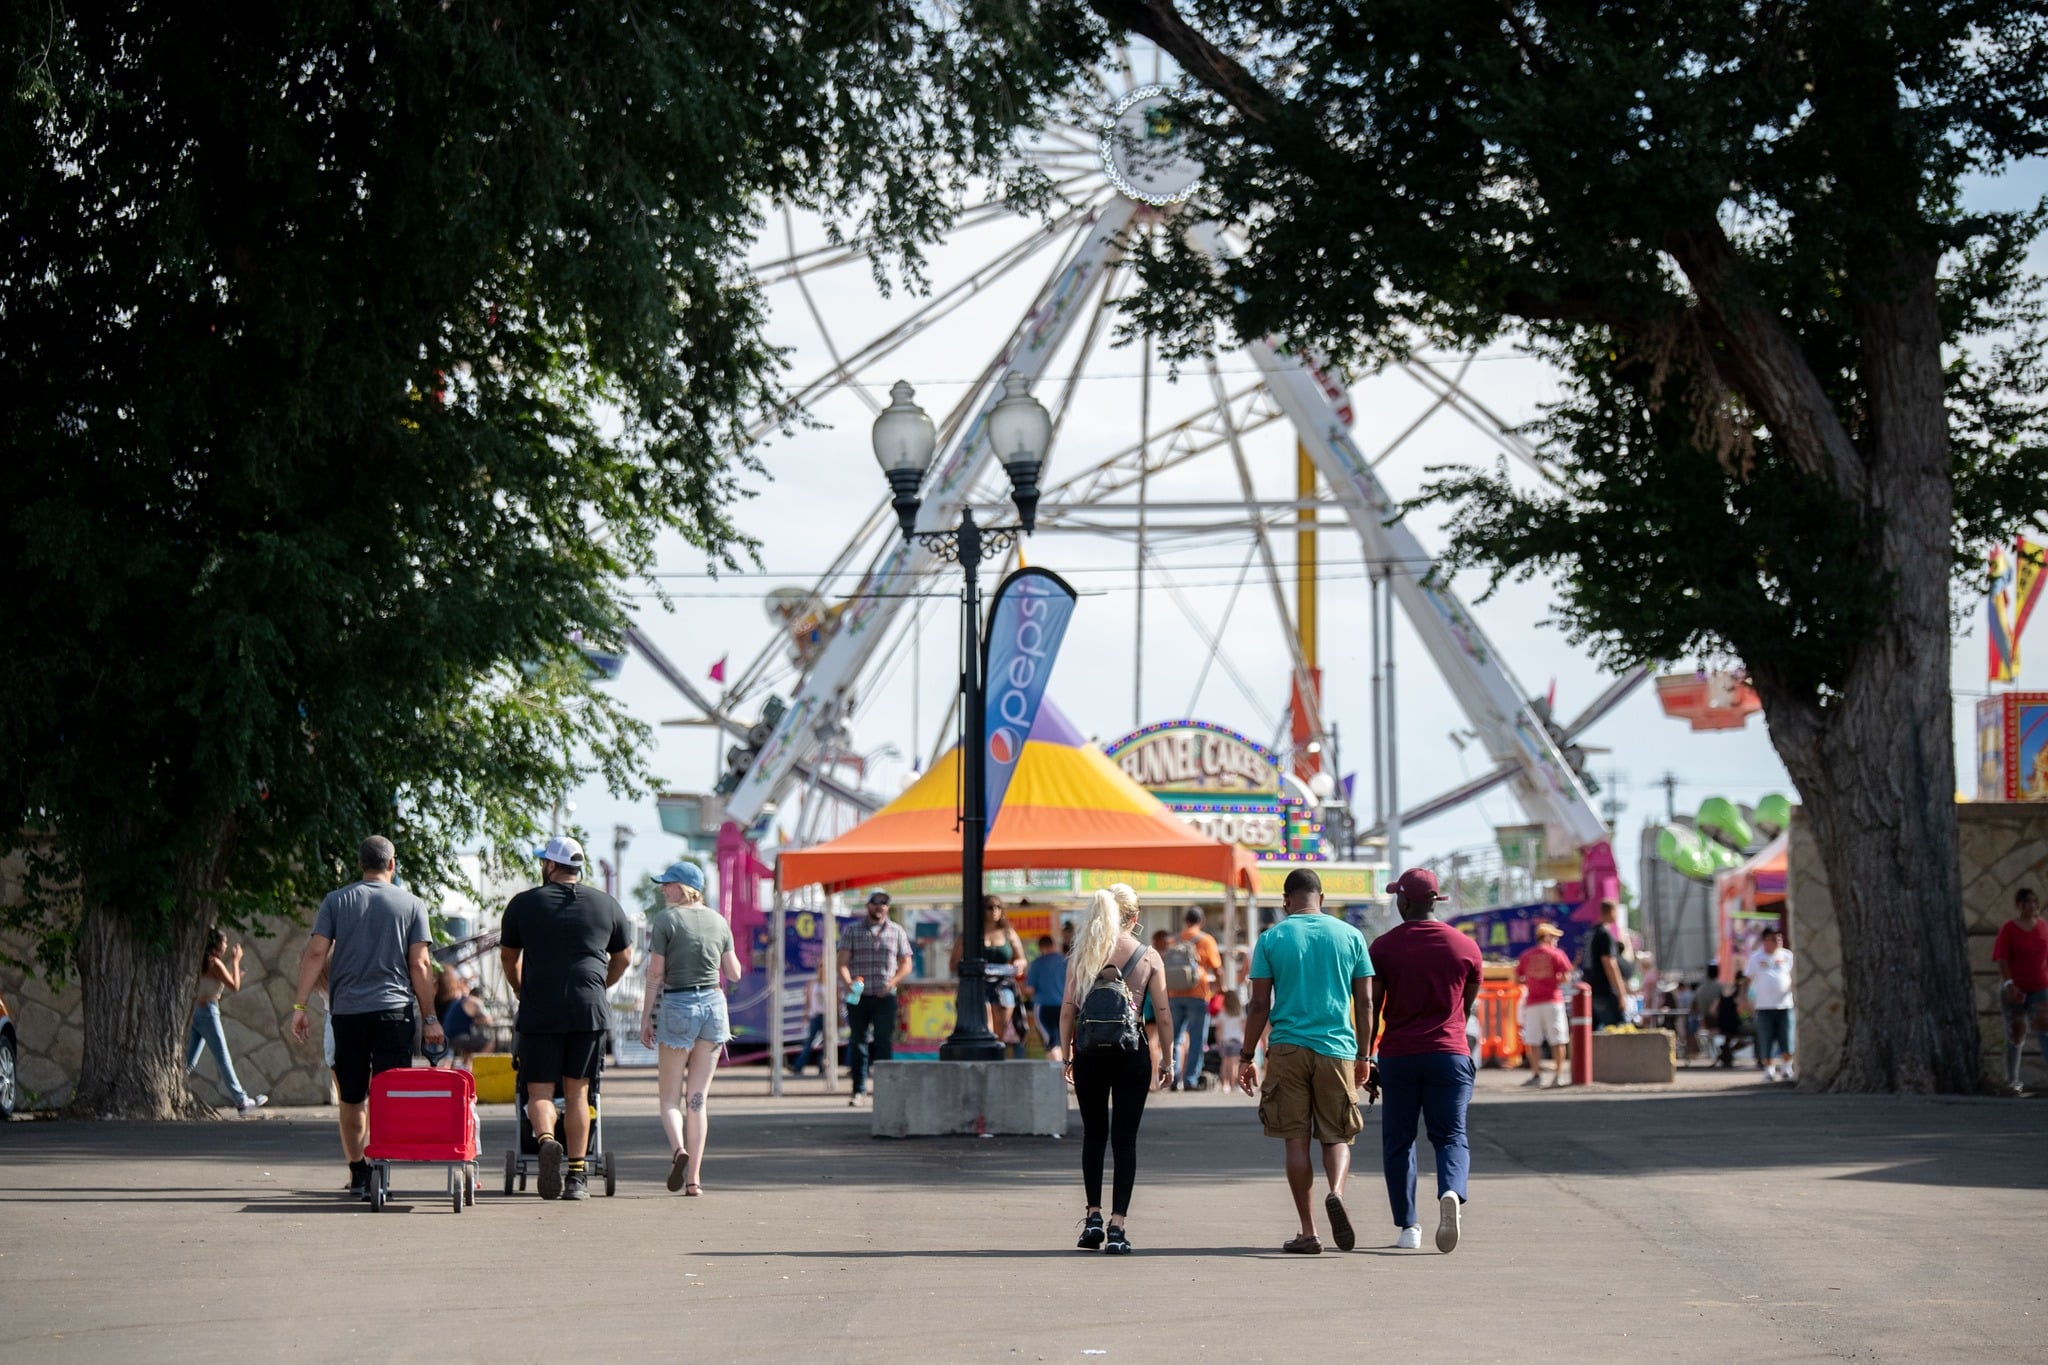 People walking into a state fair with a huge ferris wheel and food booths